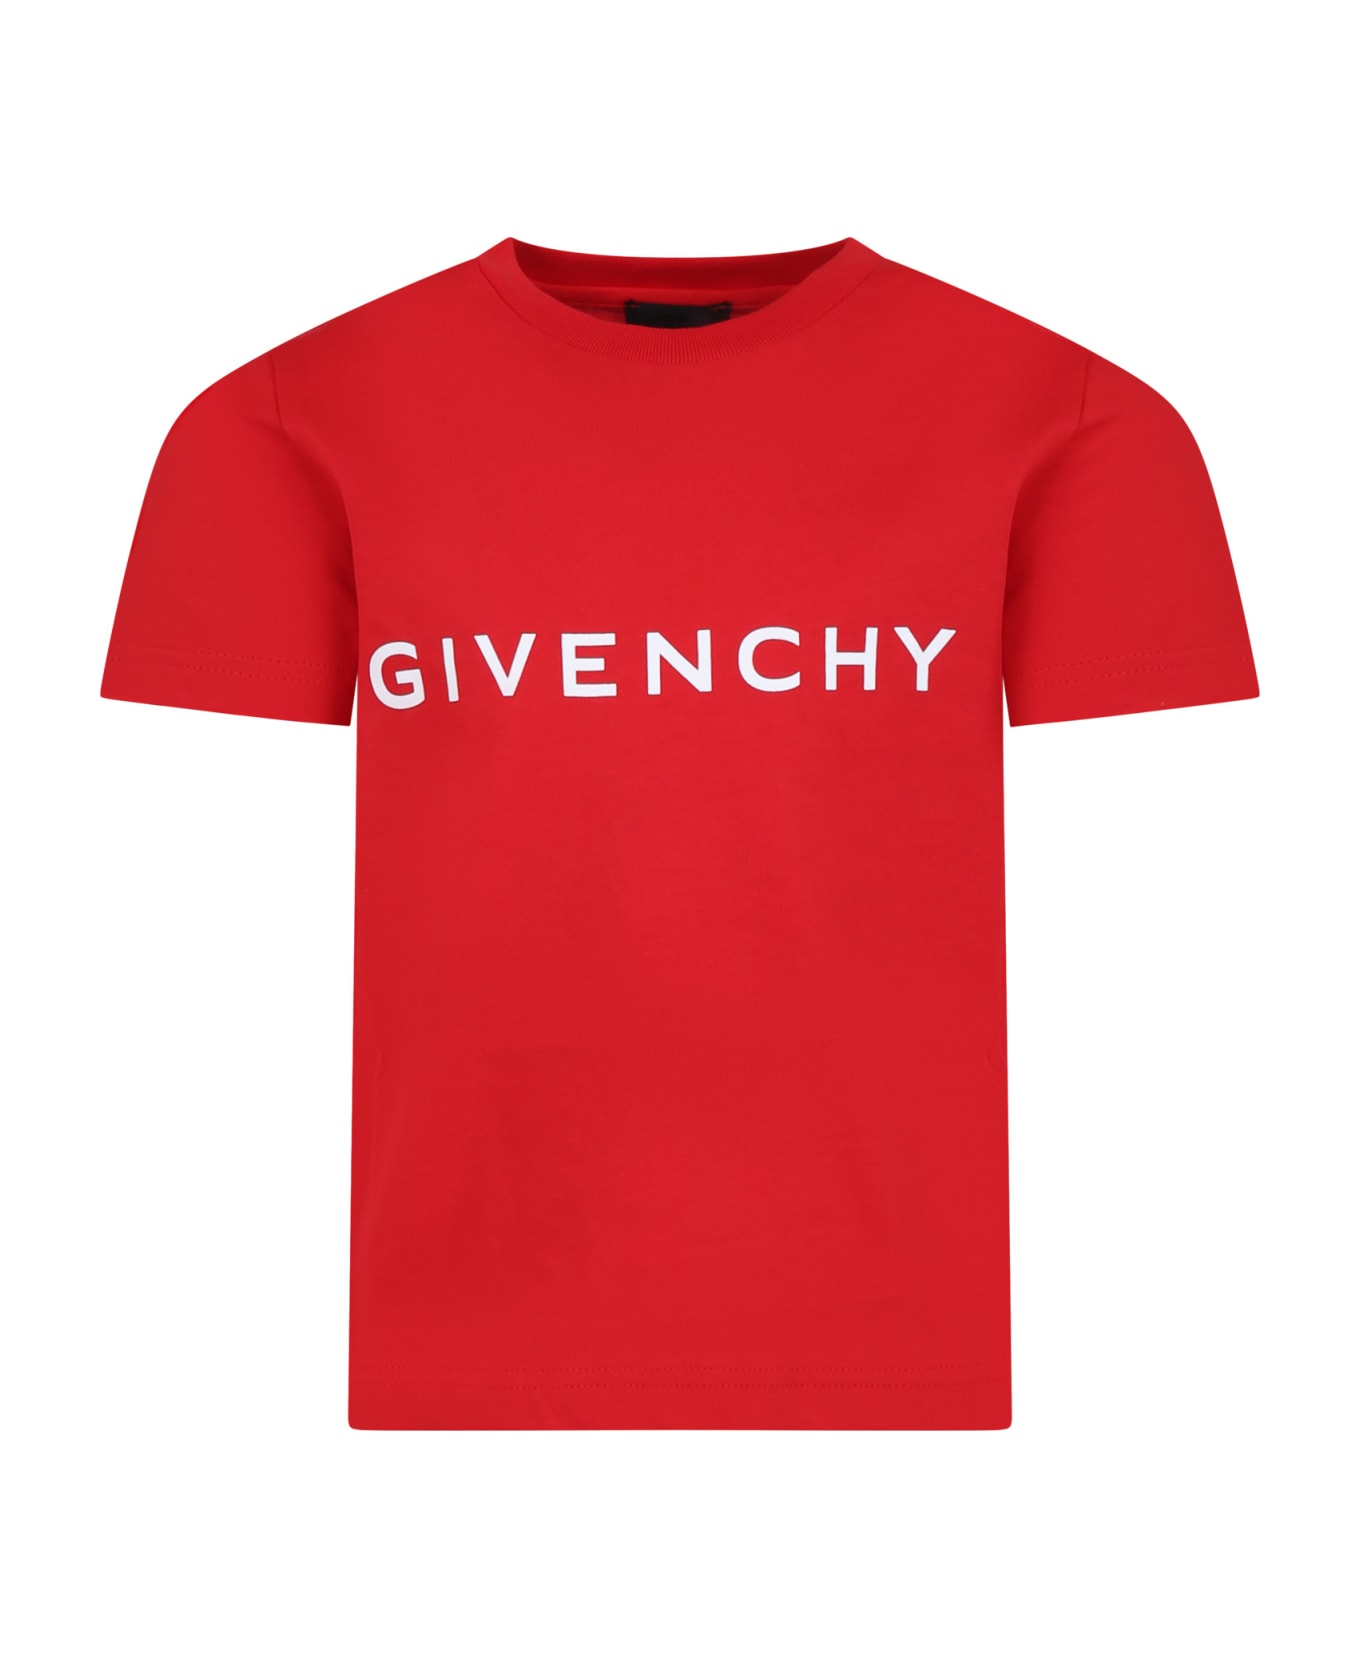 Givenchy Red T-shirt For Kids With Logo - Red